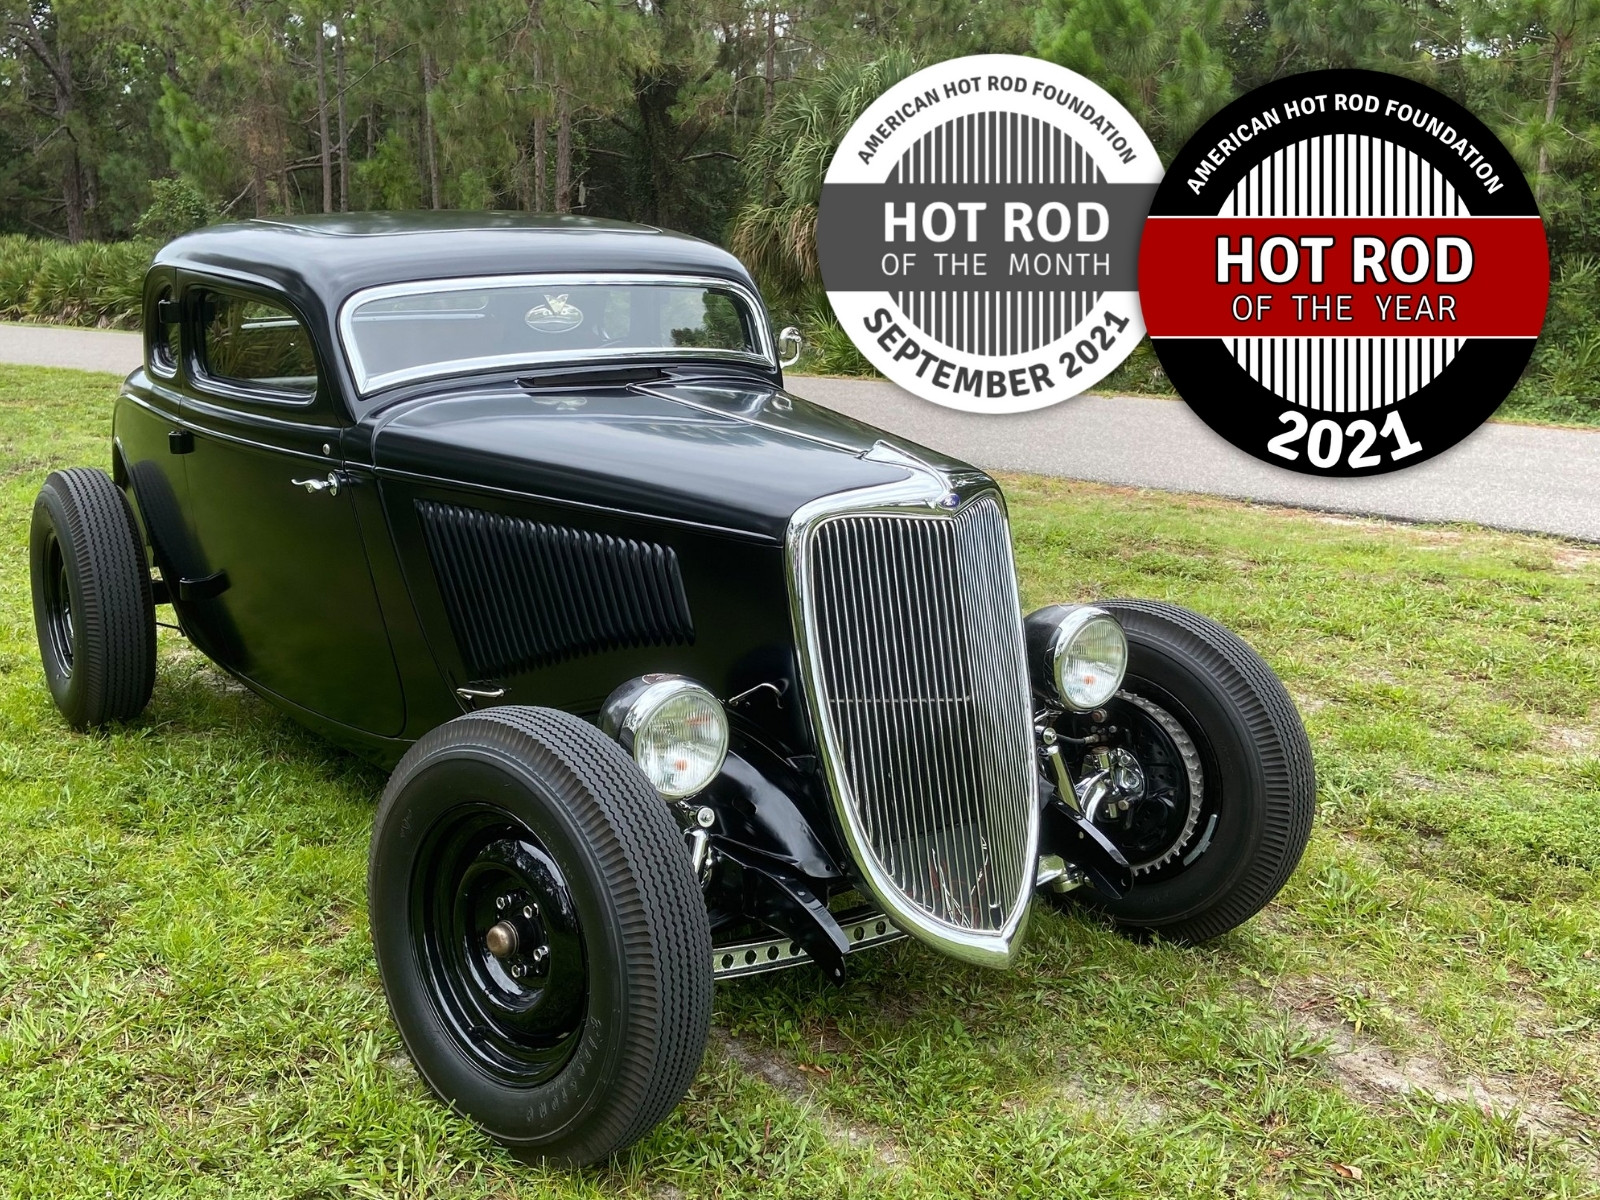 Hot Rod of the Year 1